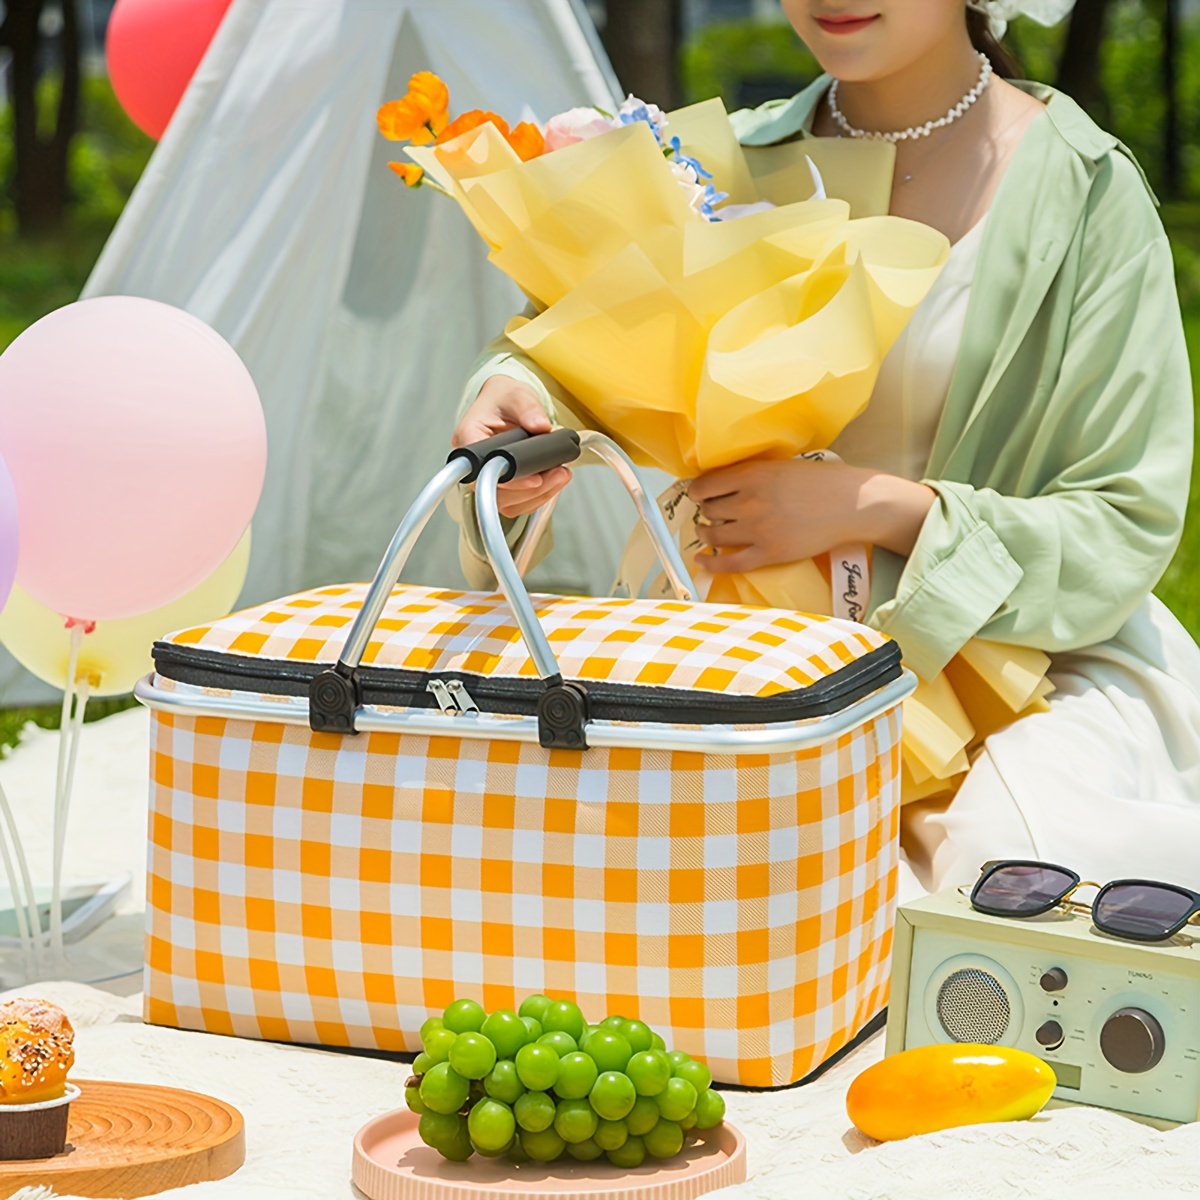 

1pc Portable Insulated Picnic Basket - Yellow, Aluminum Frame, Foldable Food & Drink Cooler For Outdoor Camping And Beach